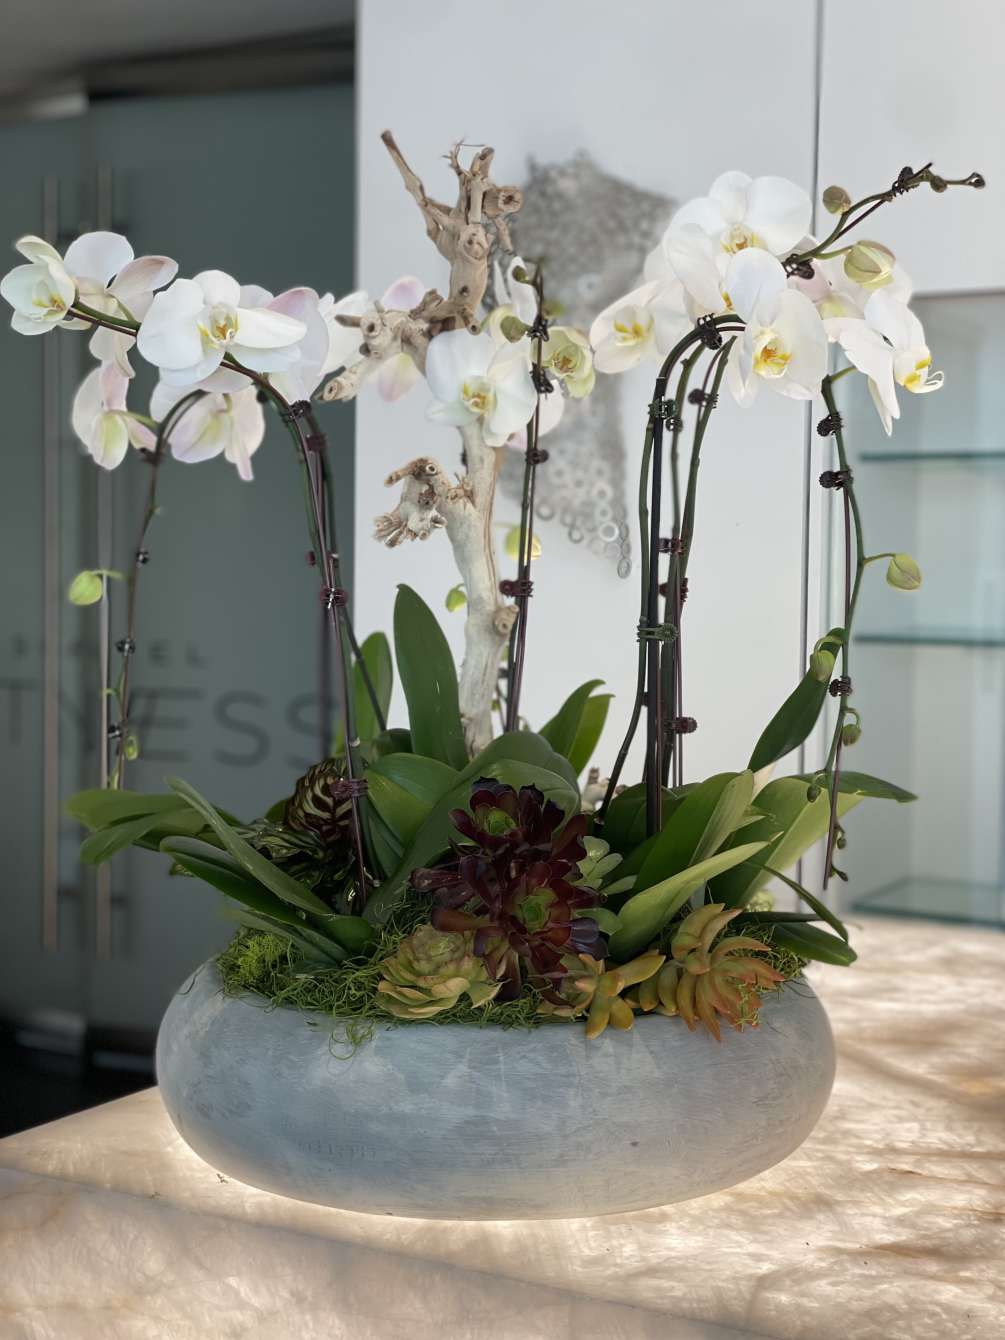 Gorgeous white orchids and succulents arranged in a concrete container. Perfect for